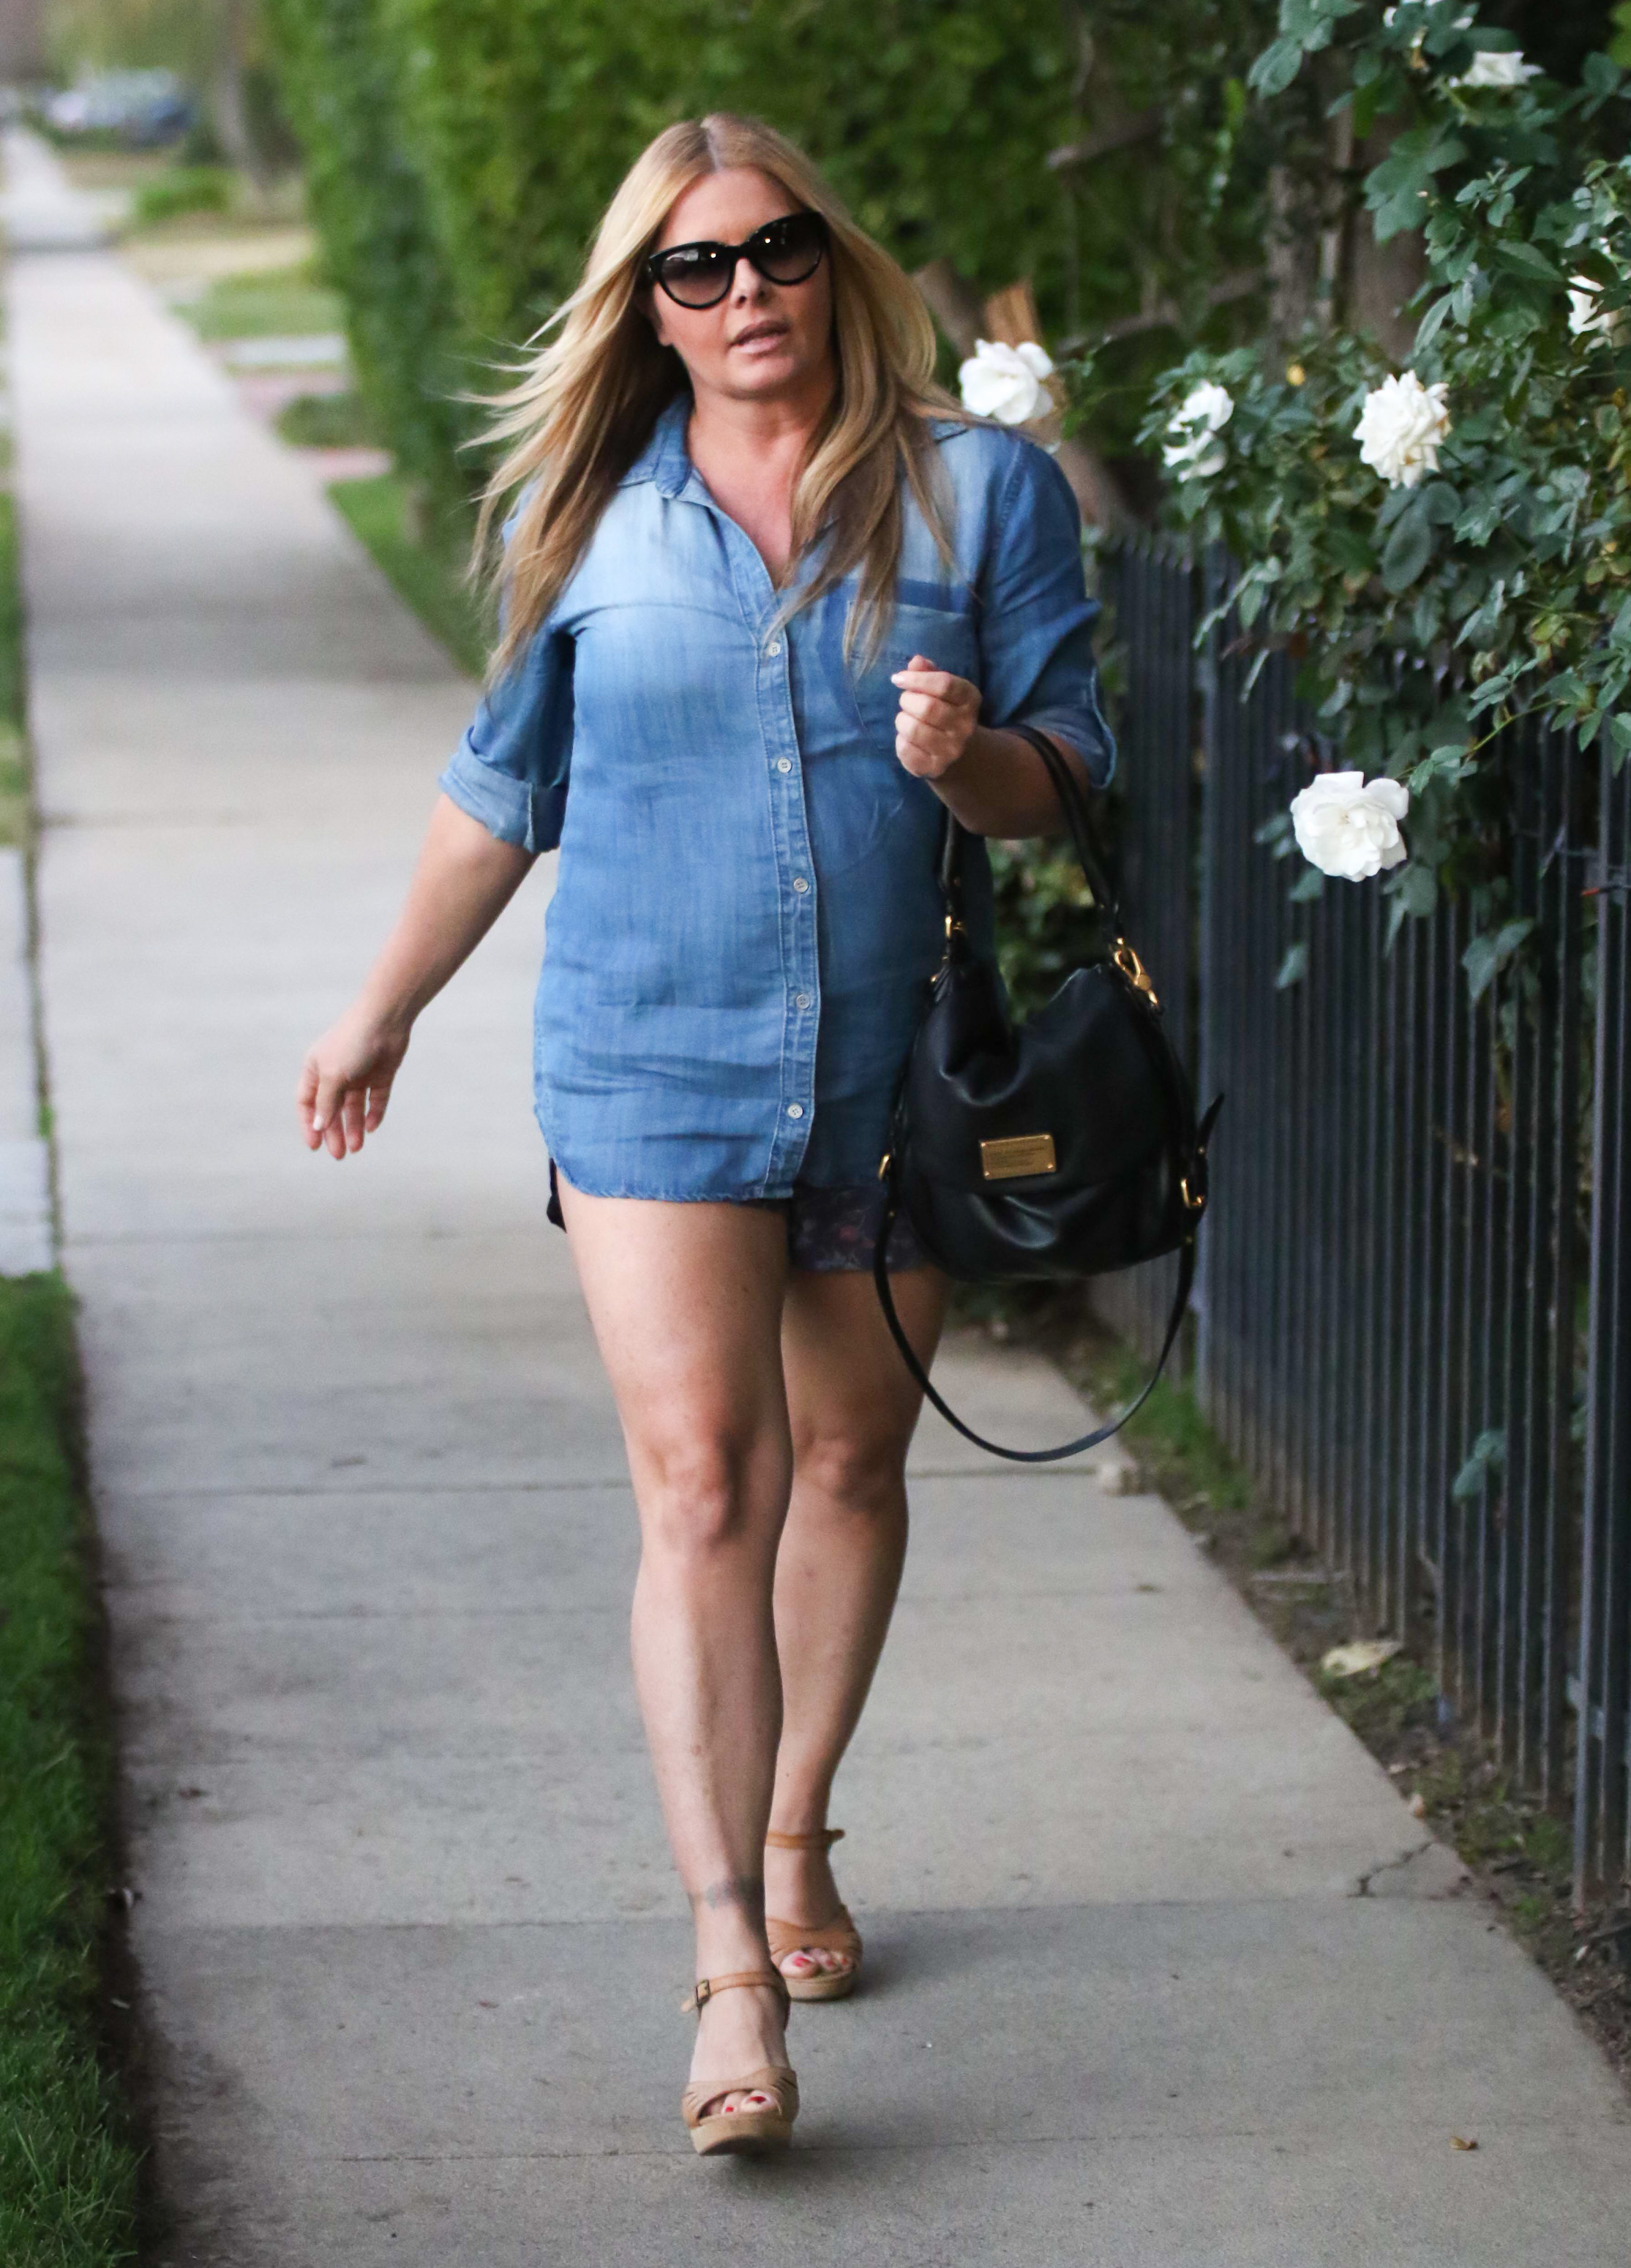 Nicole Eggert in Los Angeles on January 17, 2015. | Source: Getty Images